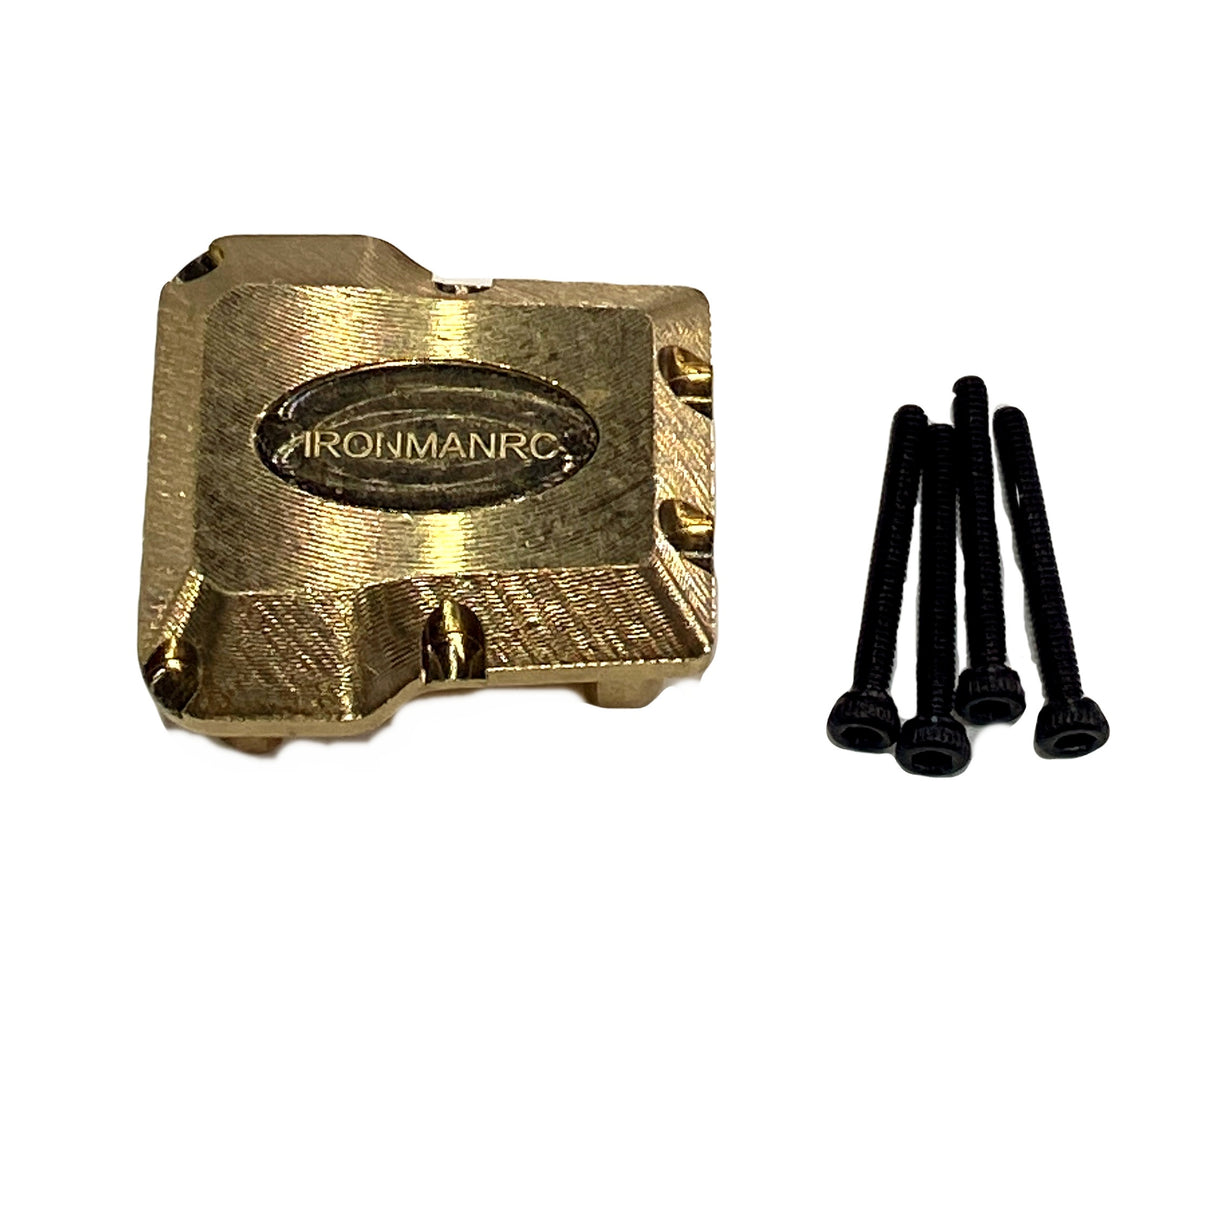 IRonManRC Brass Axle Cover mount for traxxas 1/18 scale TRX4M IHN